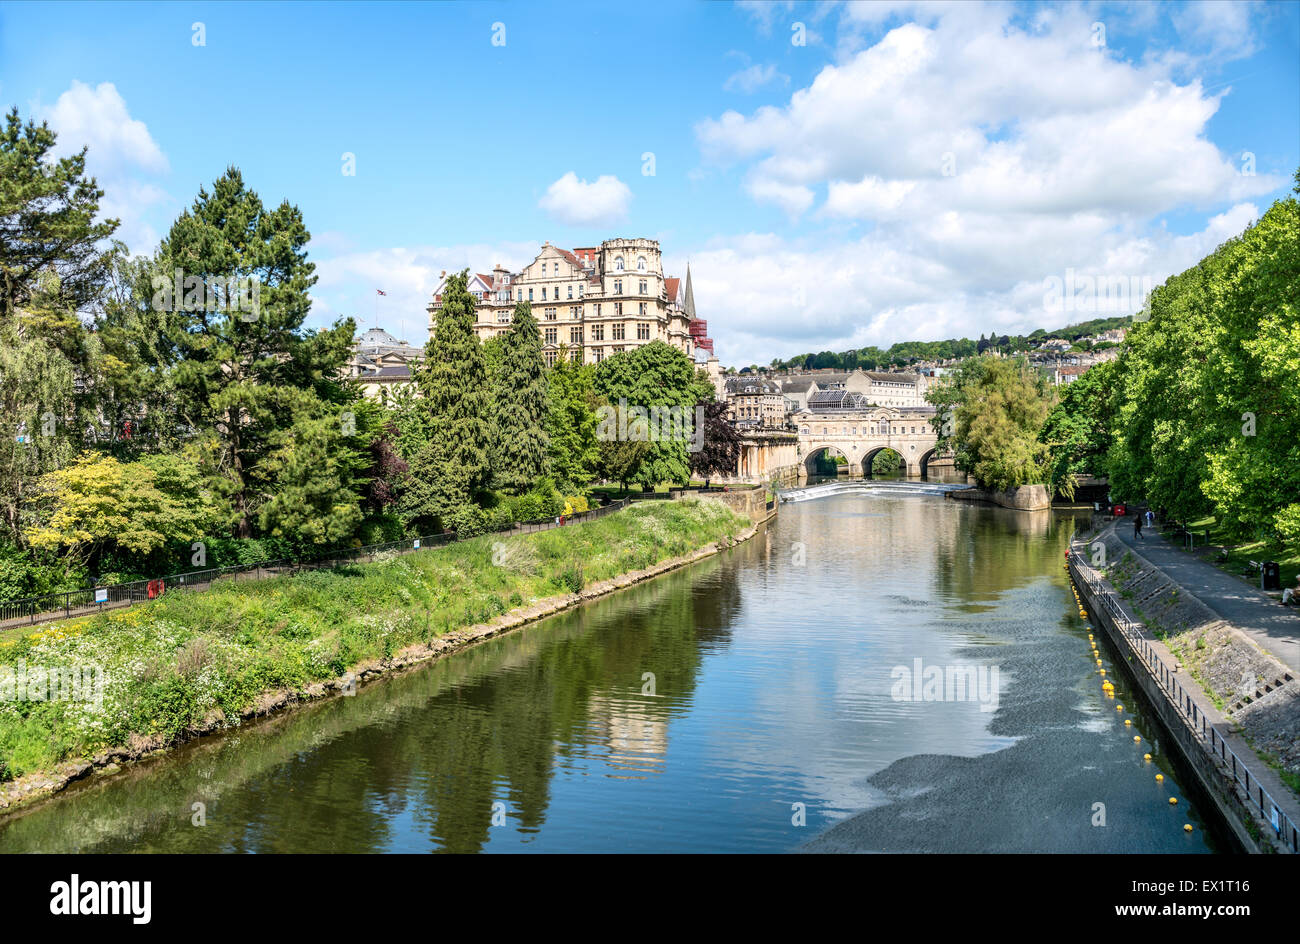 View over the Parade Gardens at the riverbanks of the River Avon, Bath, Somerset, England Stock Photo